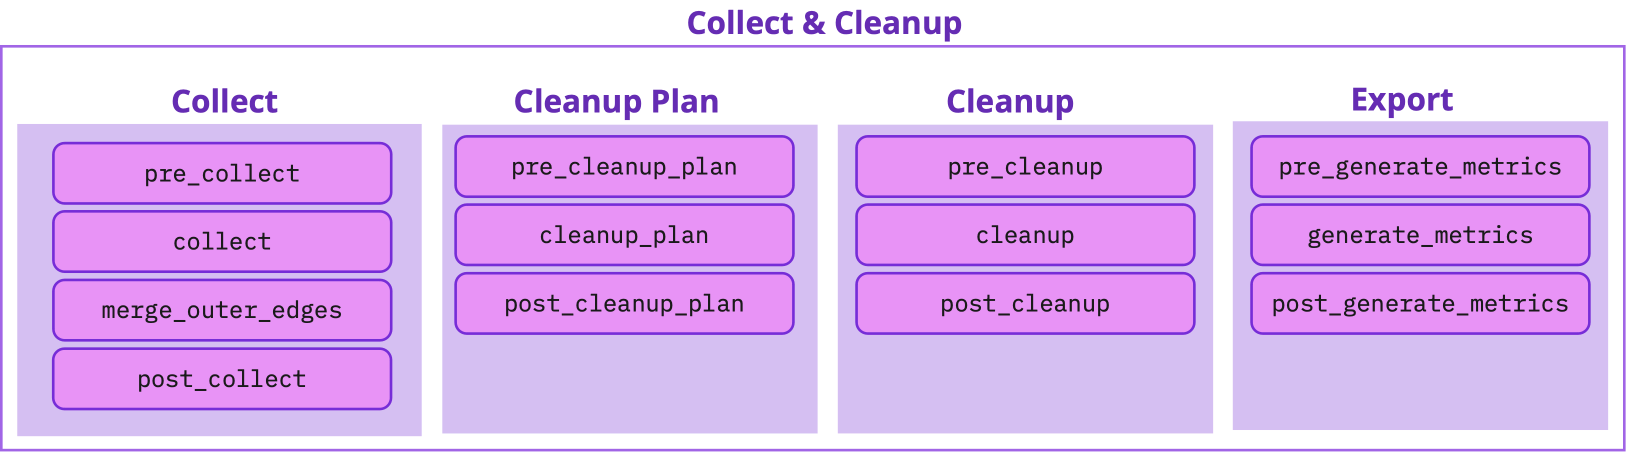 collect_and_cleanup phases